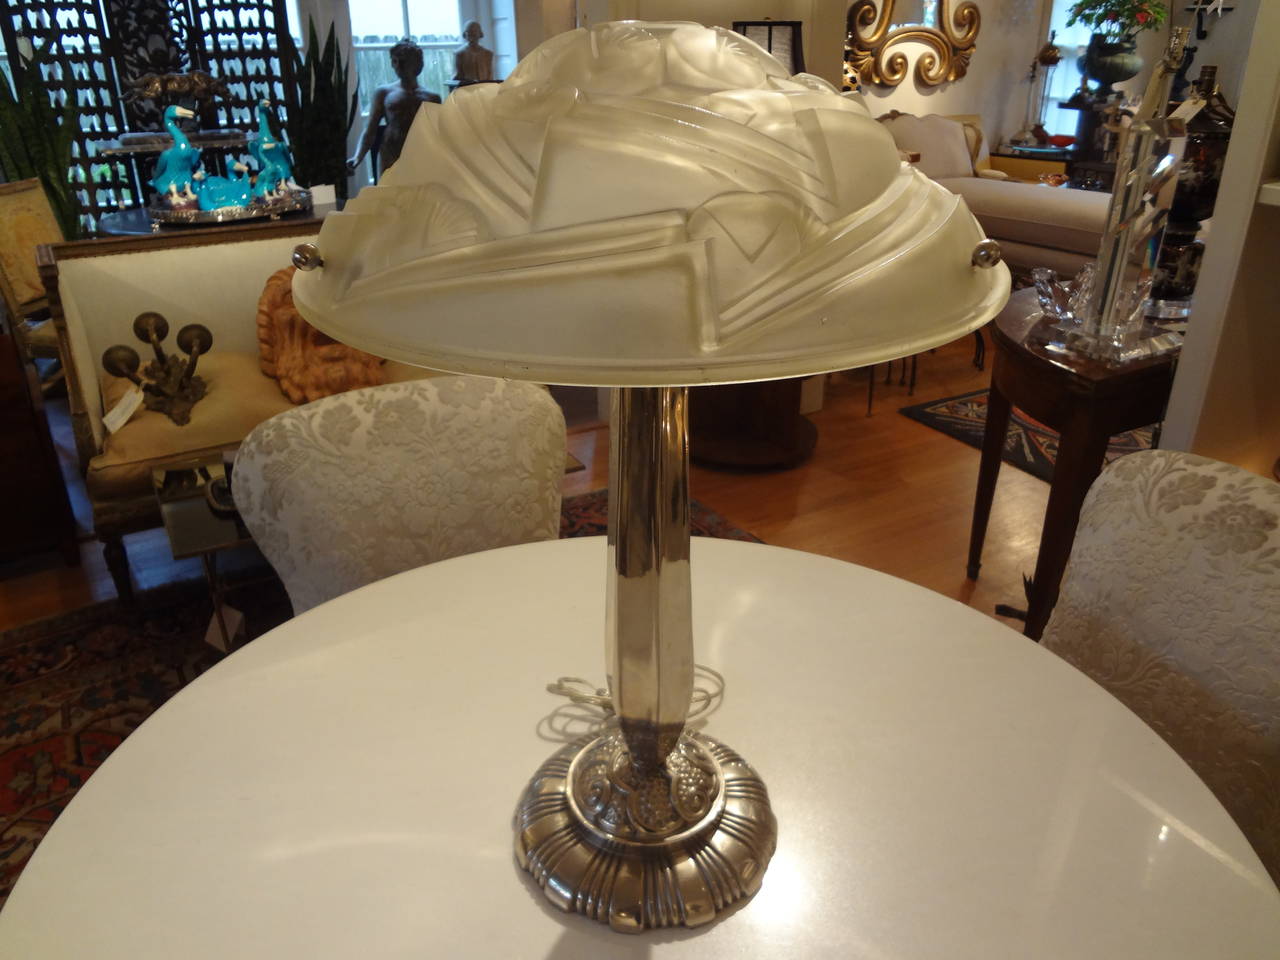 French Art Deco nickeled bronze table lamp with frosted glass shade, newly wired for U.S. Market.

Please click KIRBY ANTIQUES logo below to view additional pieces from our vast inventory.